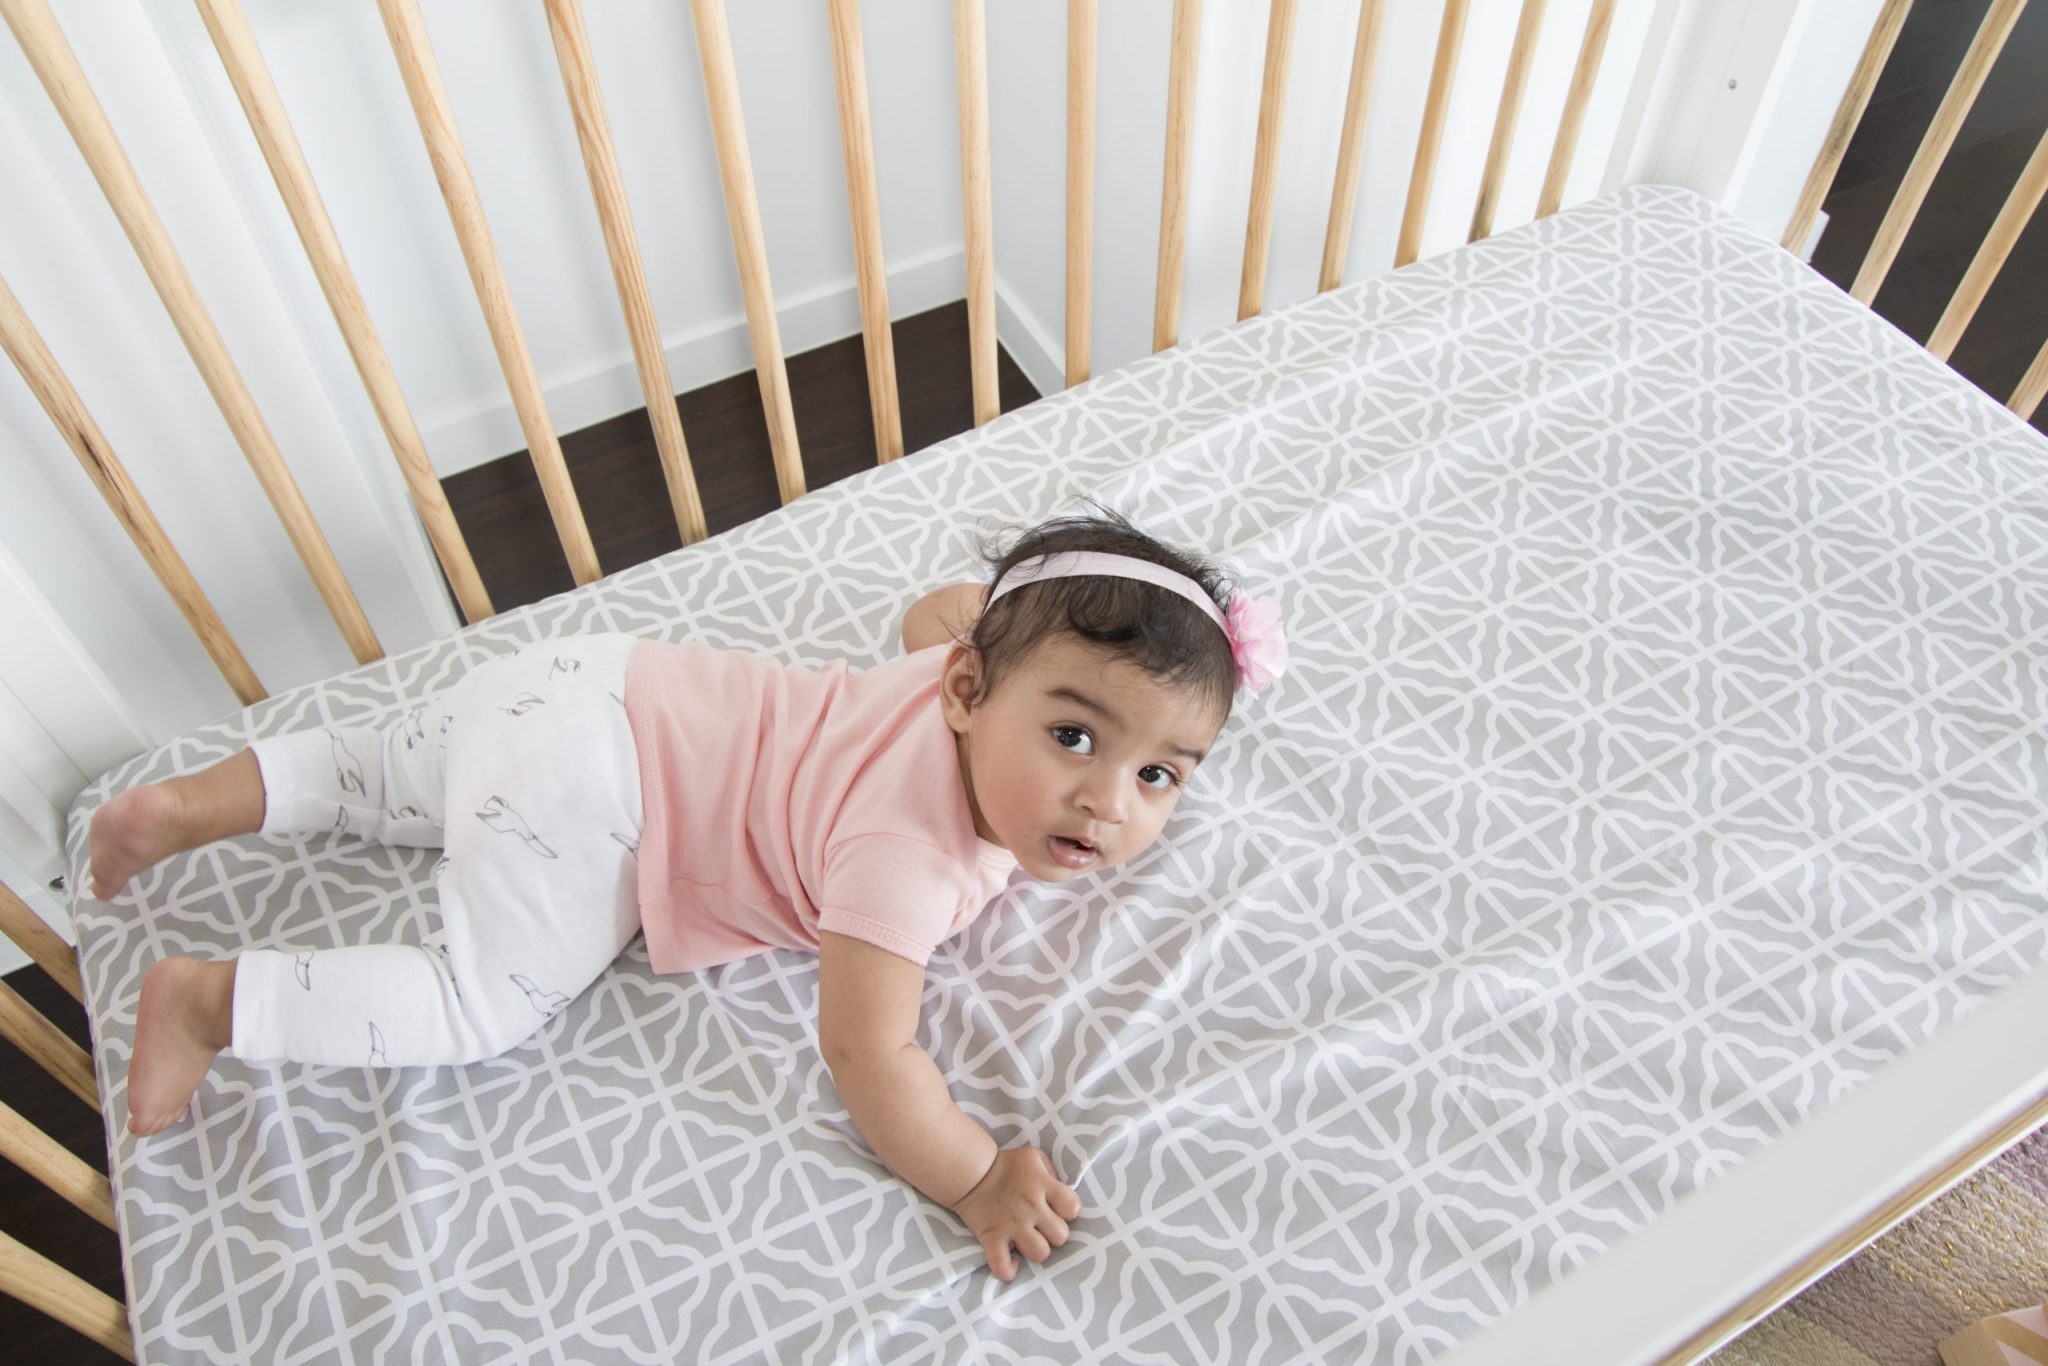 Knotted cot bumpers - why you need to avoid this new baby trend